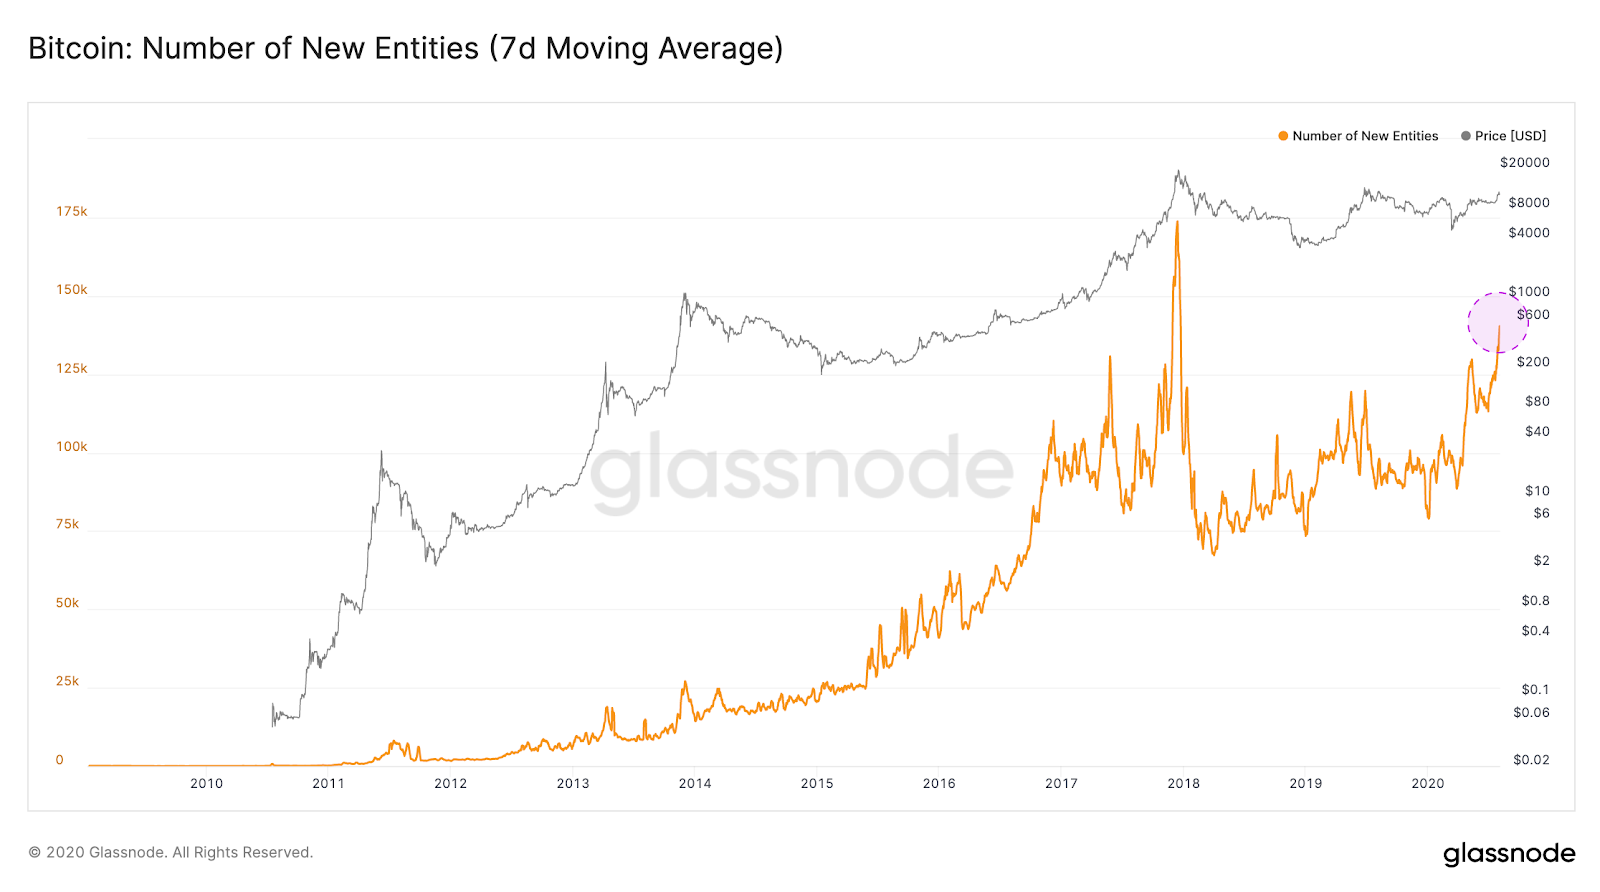 Bitcoin new entities 7-day moving average chart